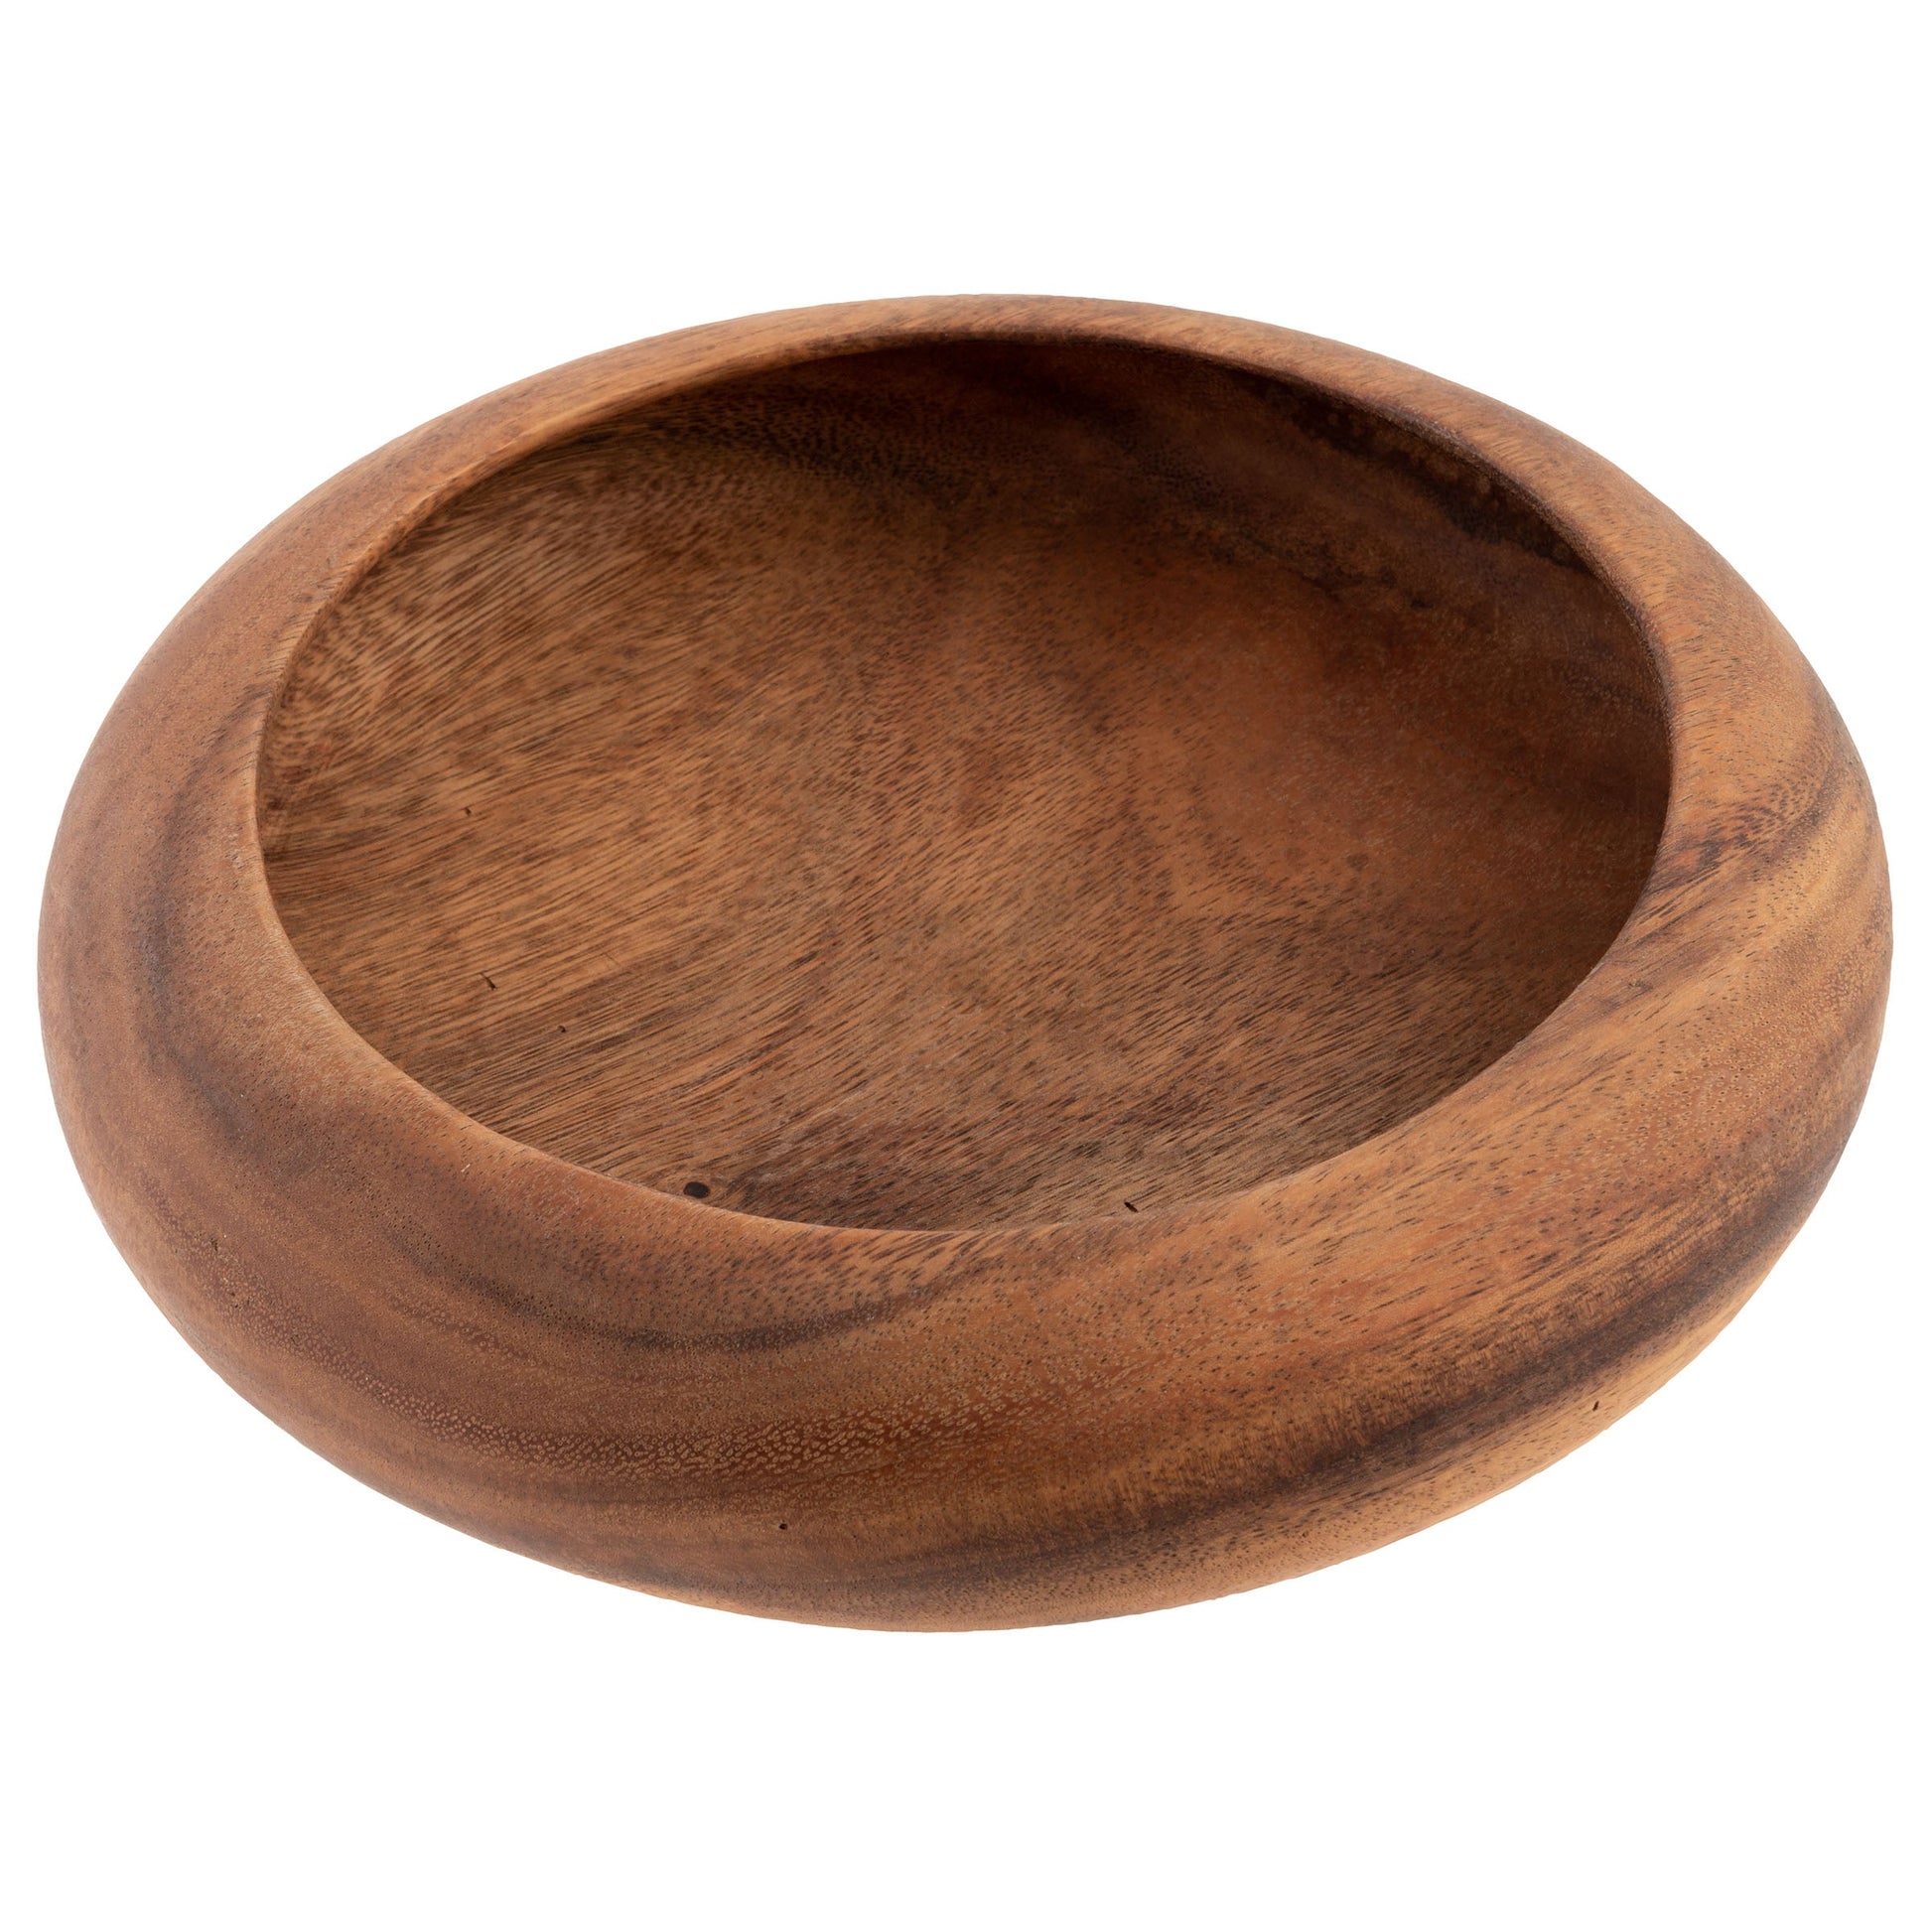 large round wooden bowl on a white background.